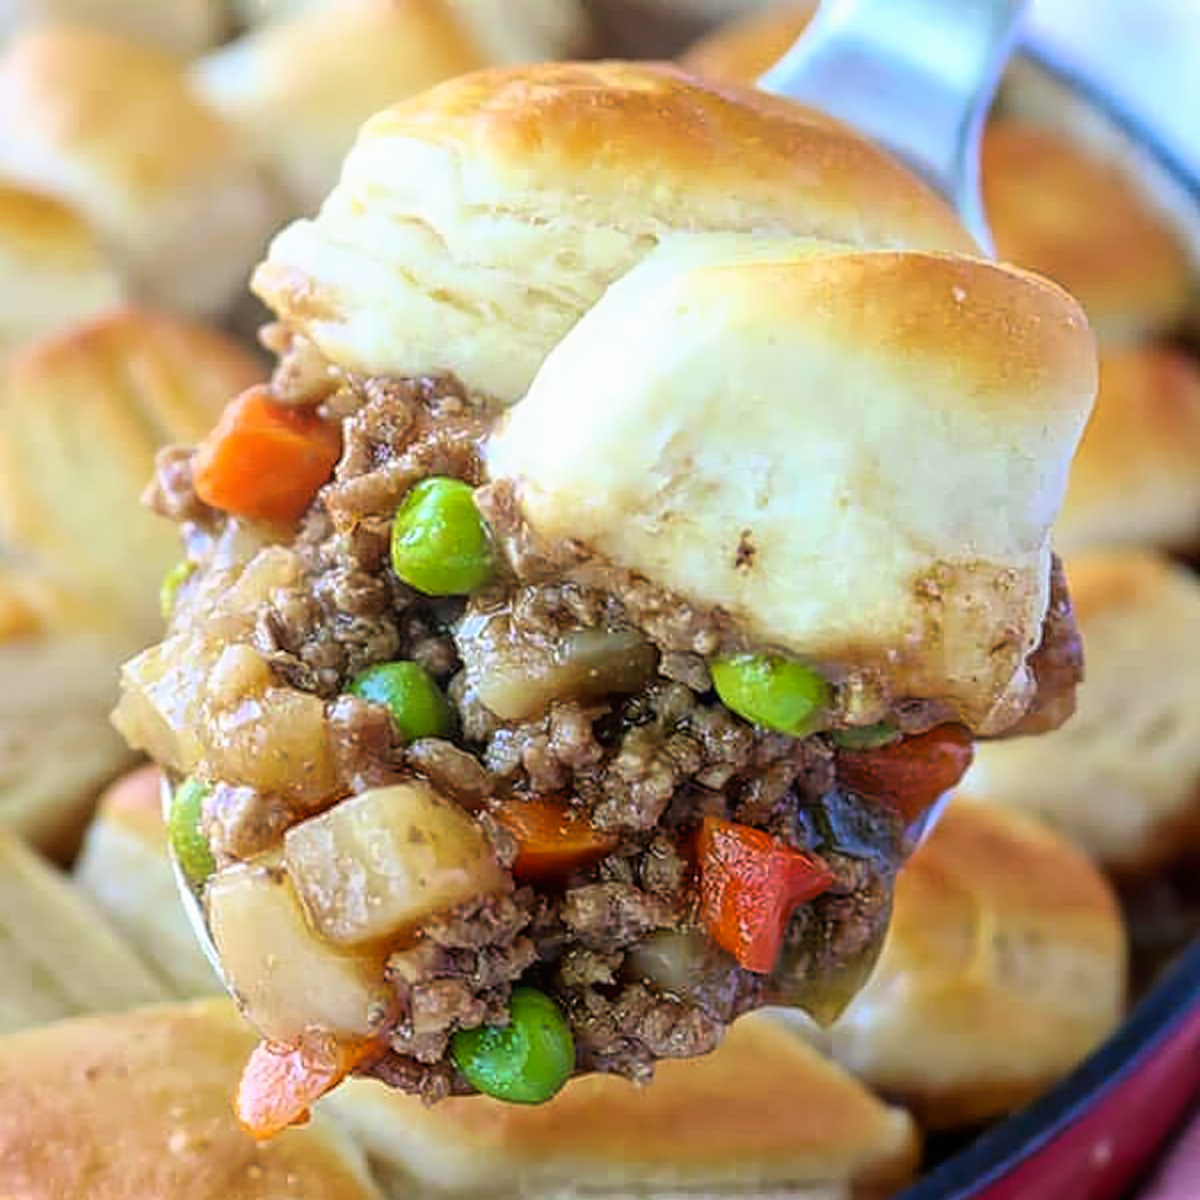 14. Skillet Ground Beef with Biscuits